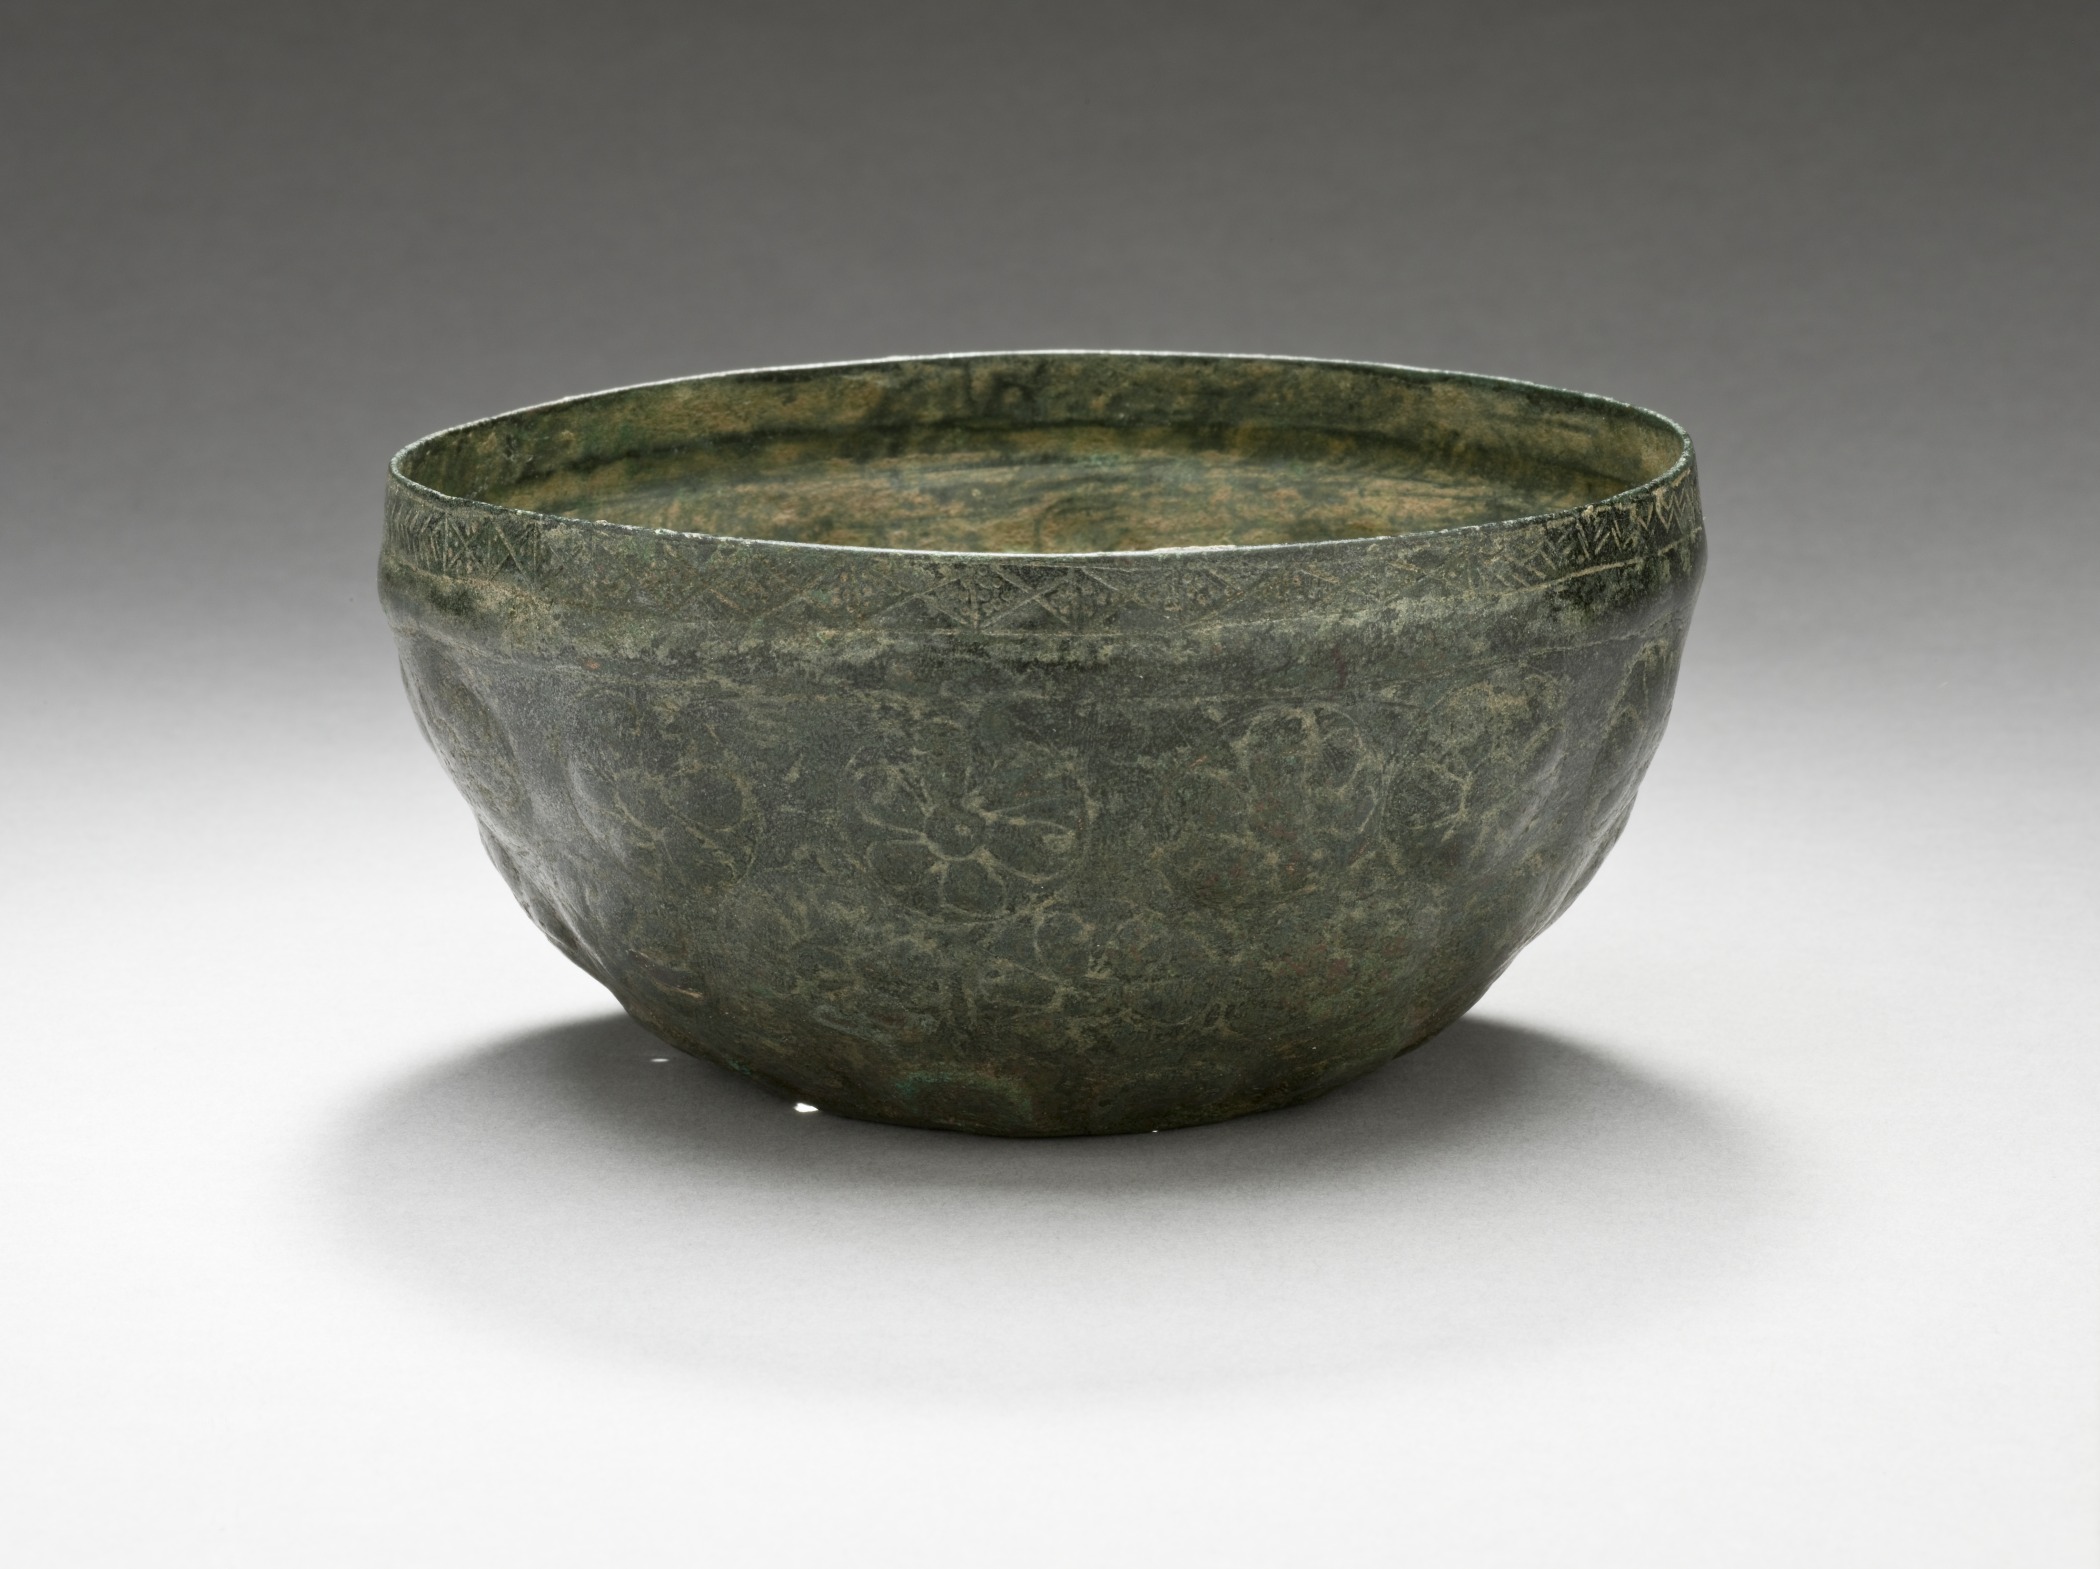 a green bowl is sitting on the table